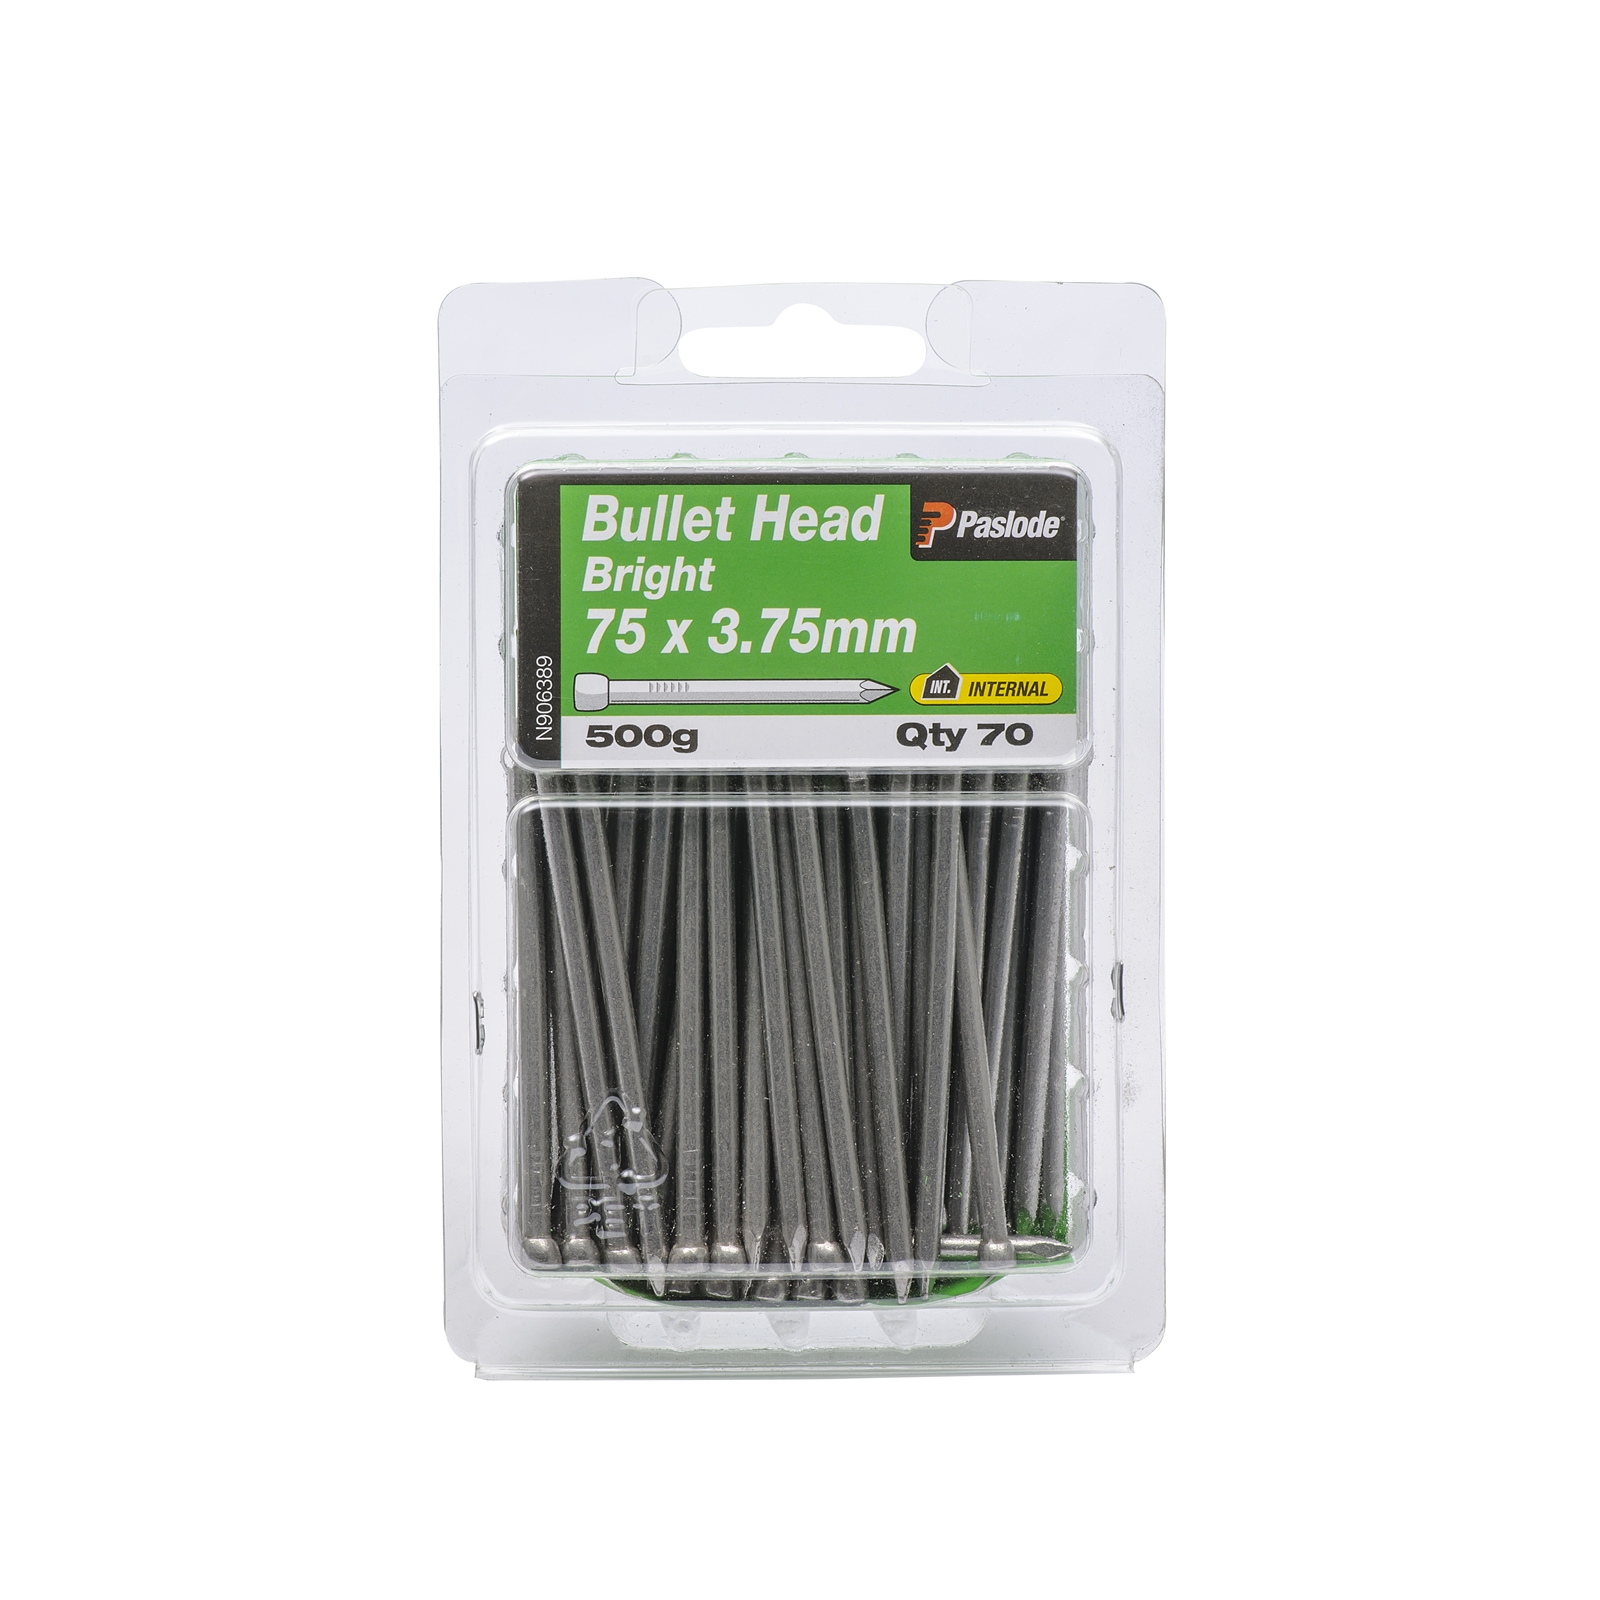 Paslode 75 x 3.75mm 500g Bright Steel Bullet Head Nails - 70 Pack